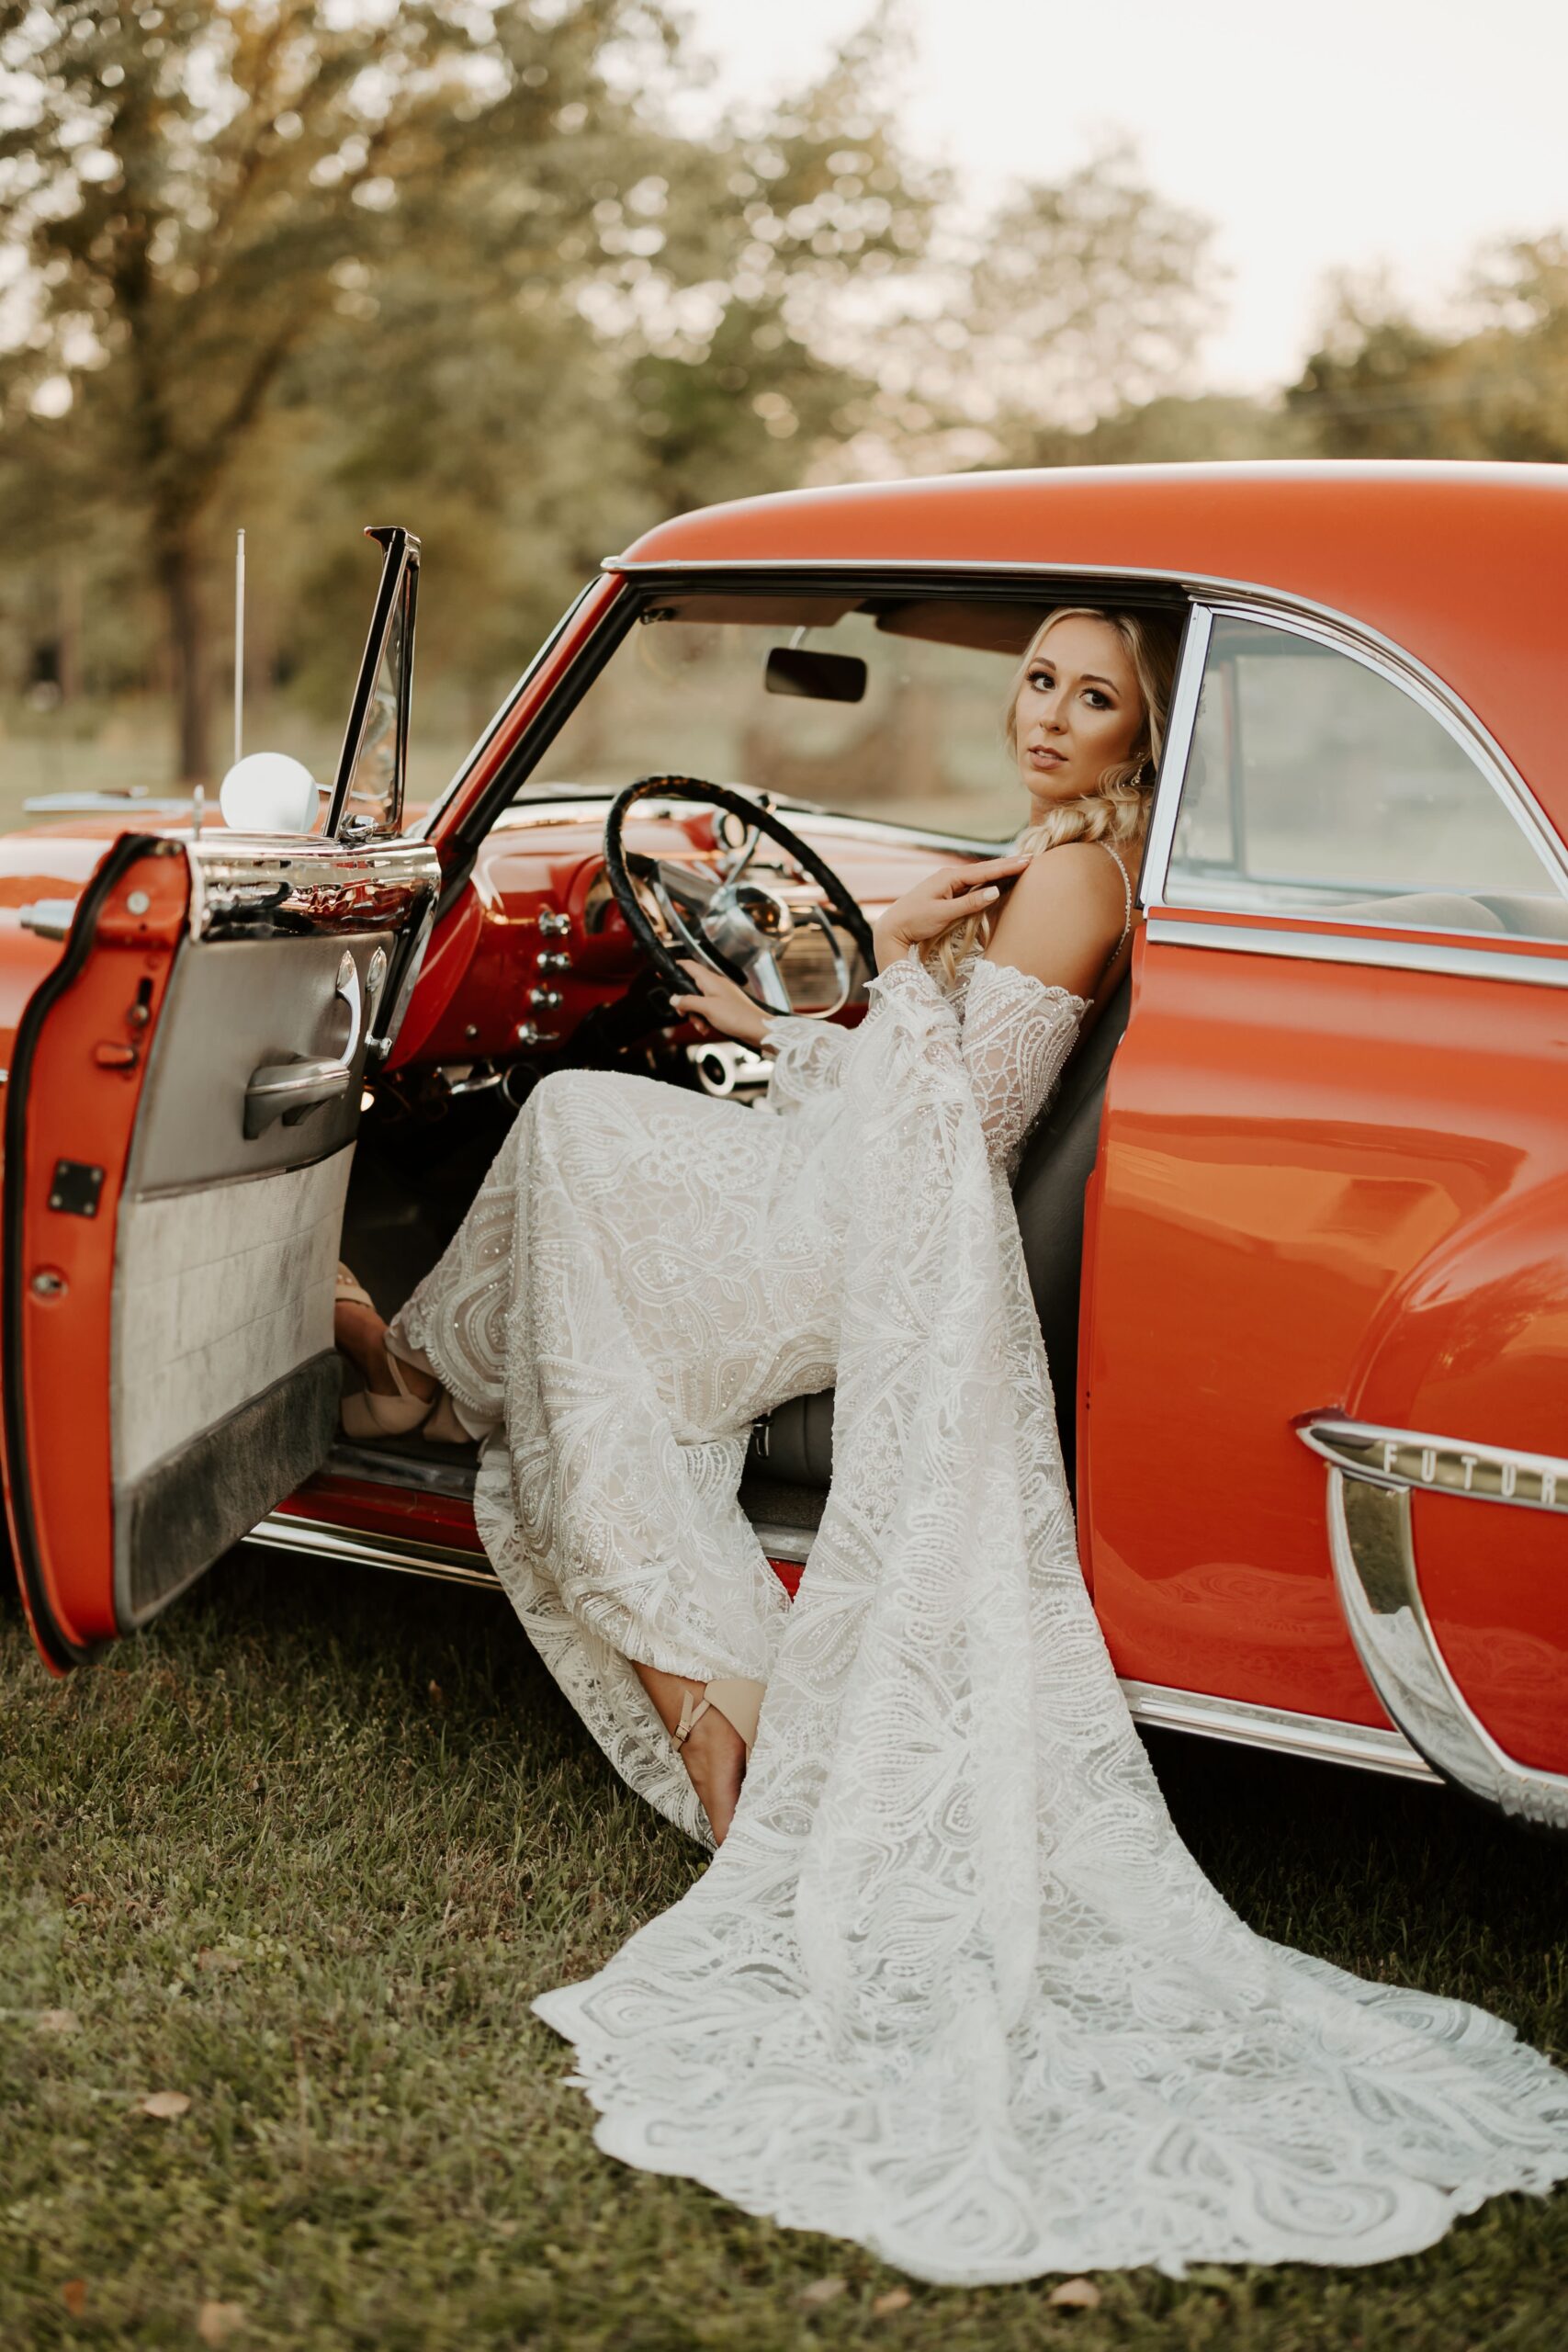 A bride being photographed in a vintage car